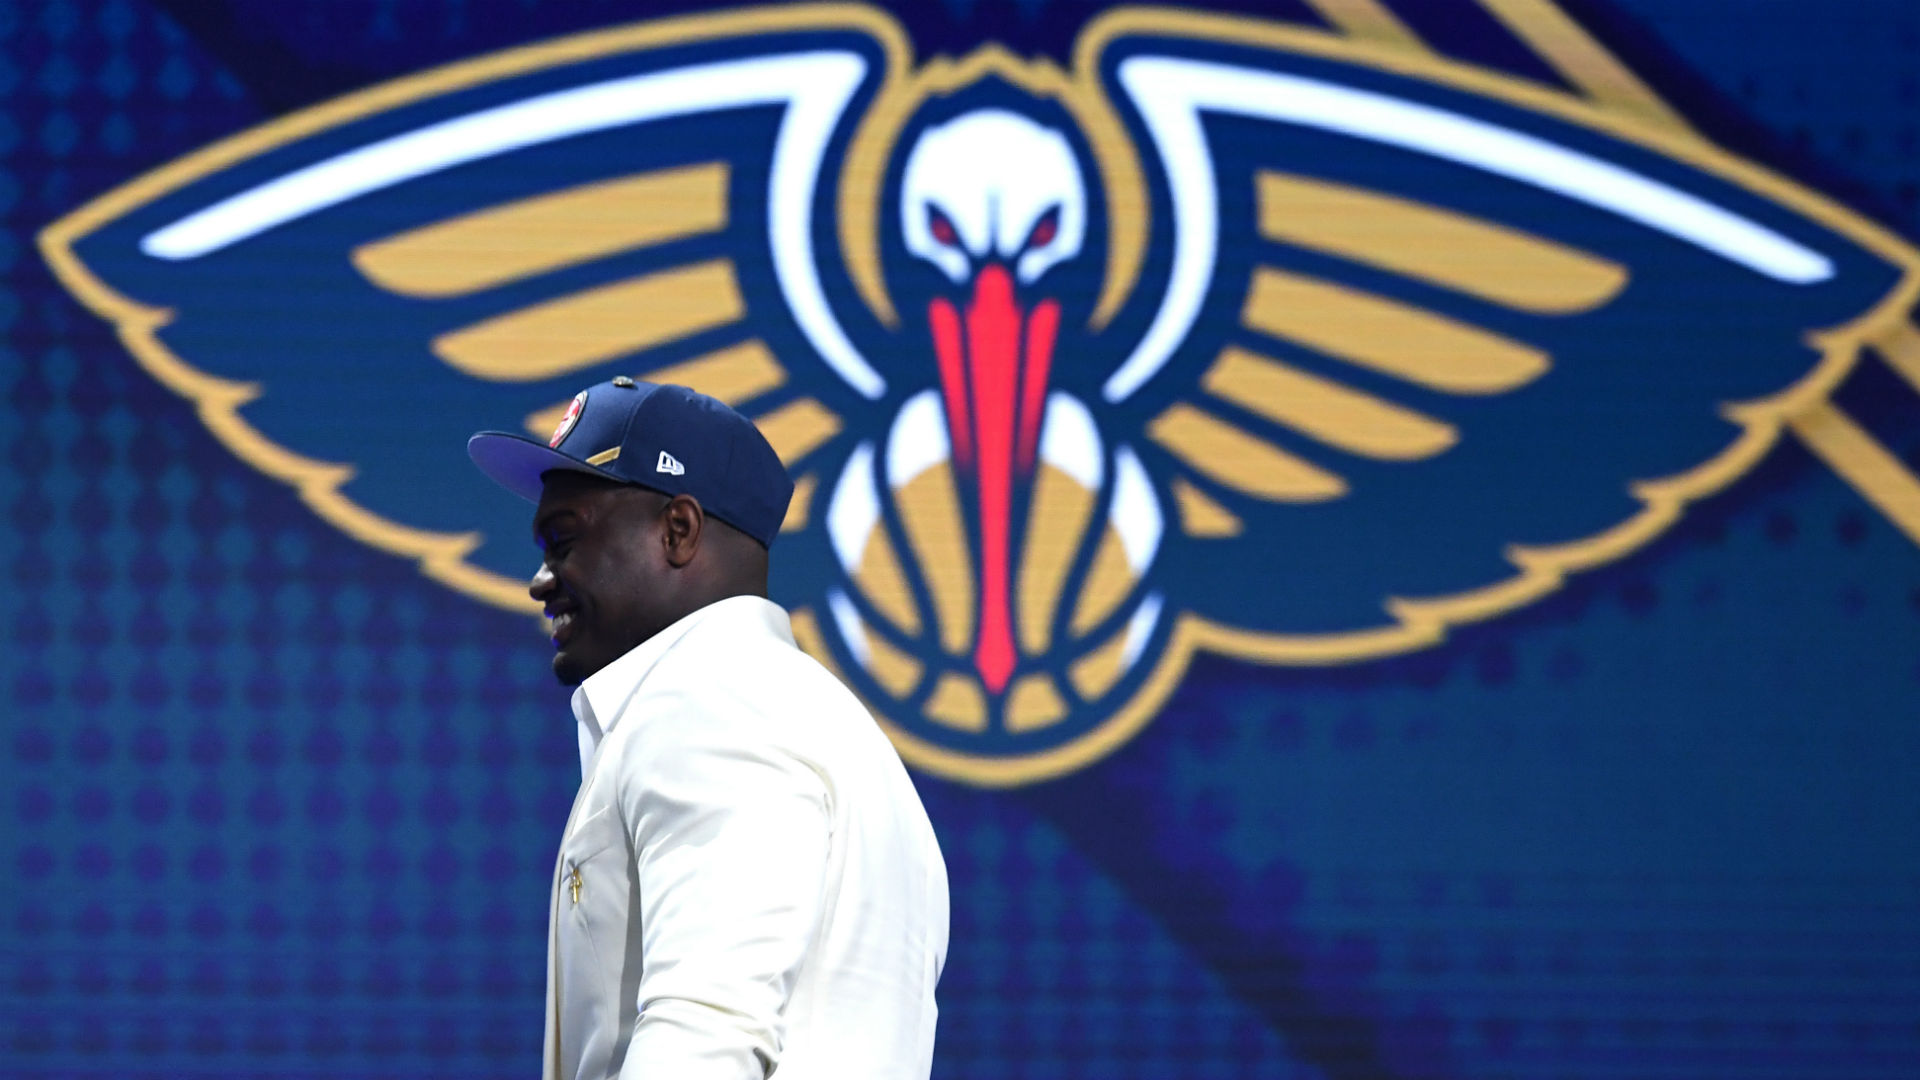 Flipboard: The Pelicans Selected Zion Williamson No. 1 Overall In The 2019 NBA Draft ...1920 x 1080